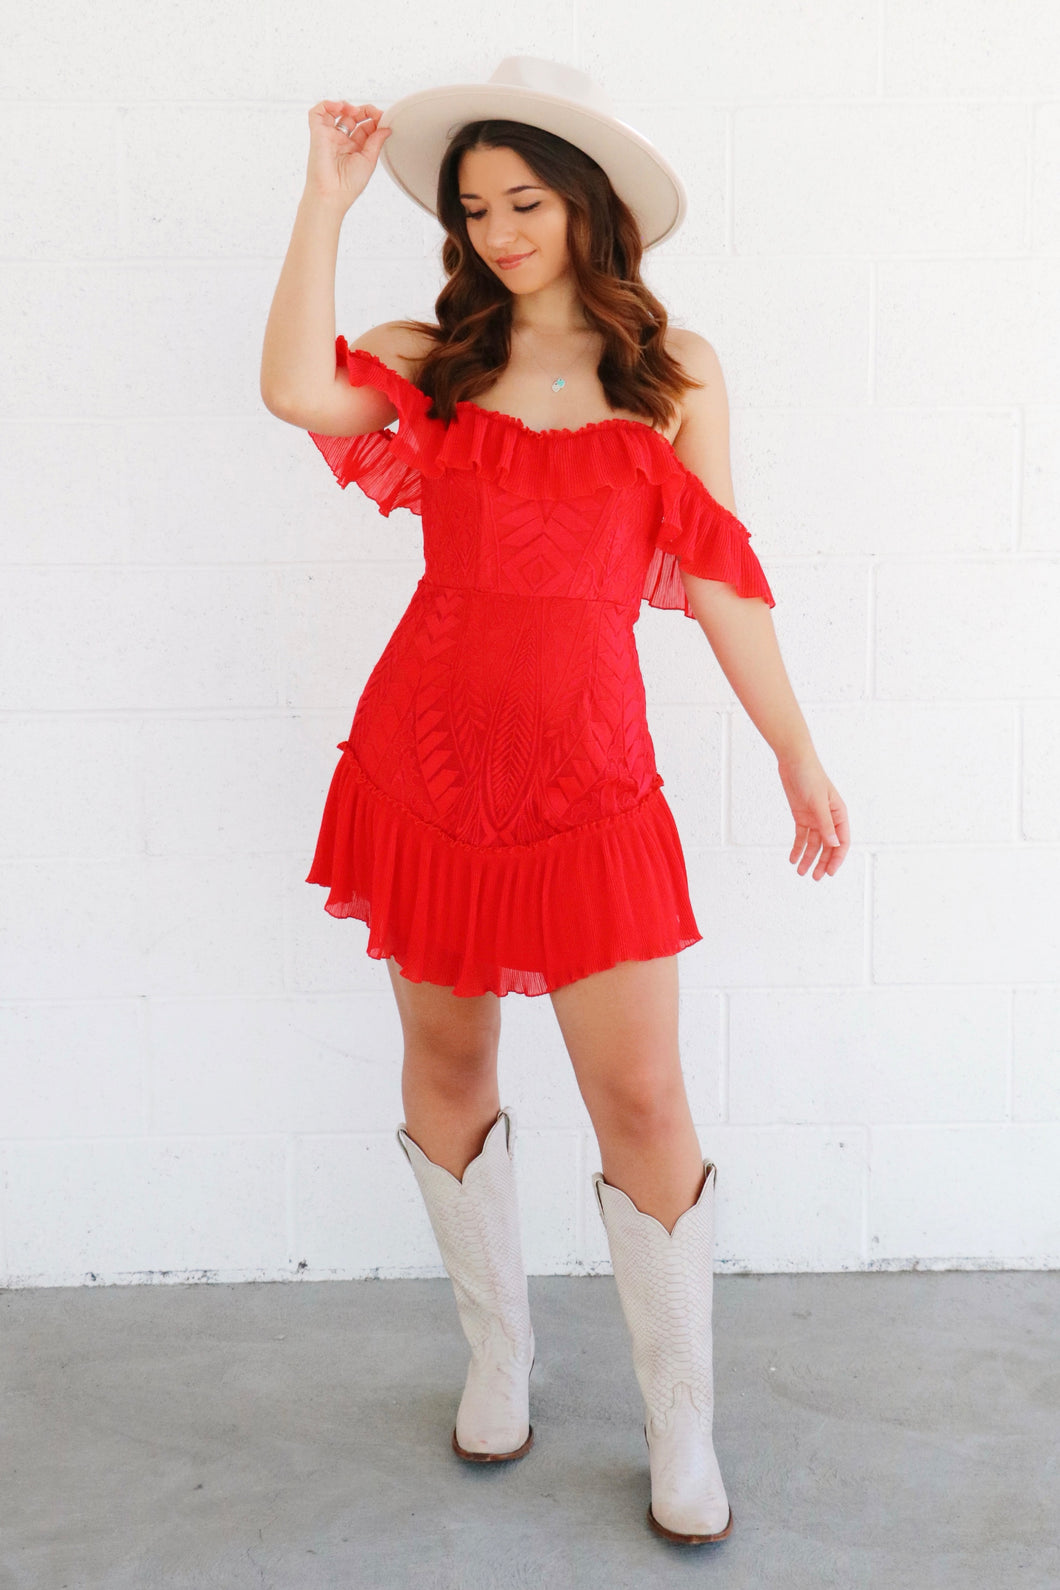 Out West Red Dress